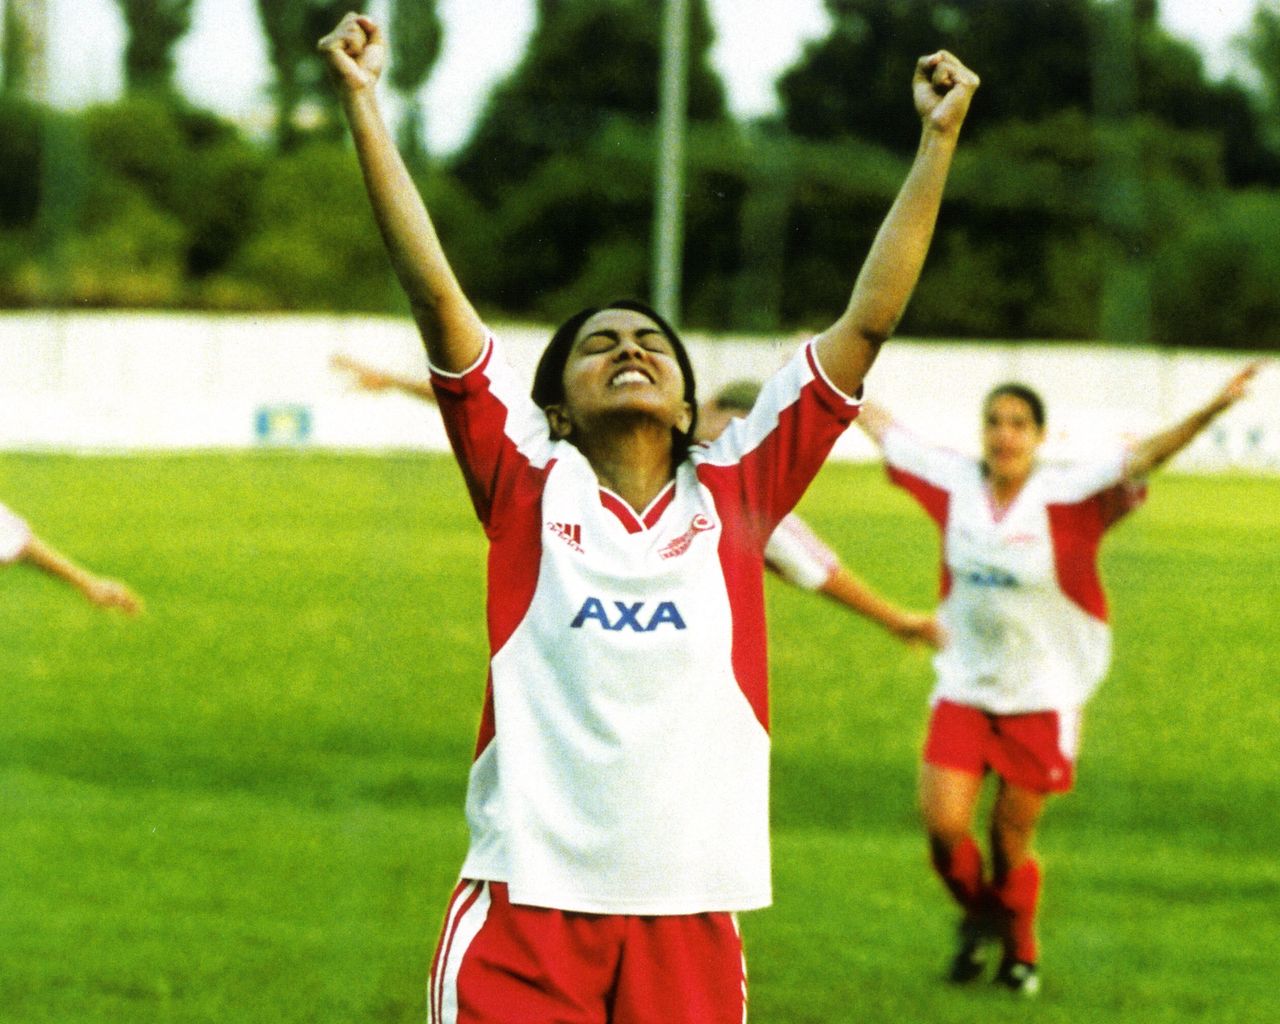 "Bend It Like Beckham" spoke to members of the South Asian community and soccer fans alike.